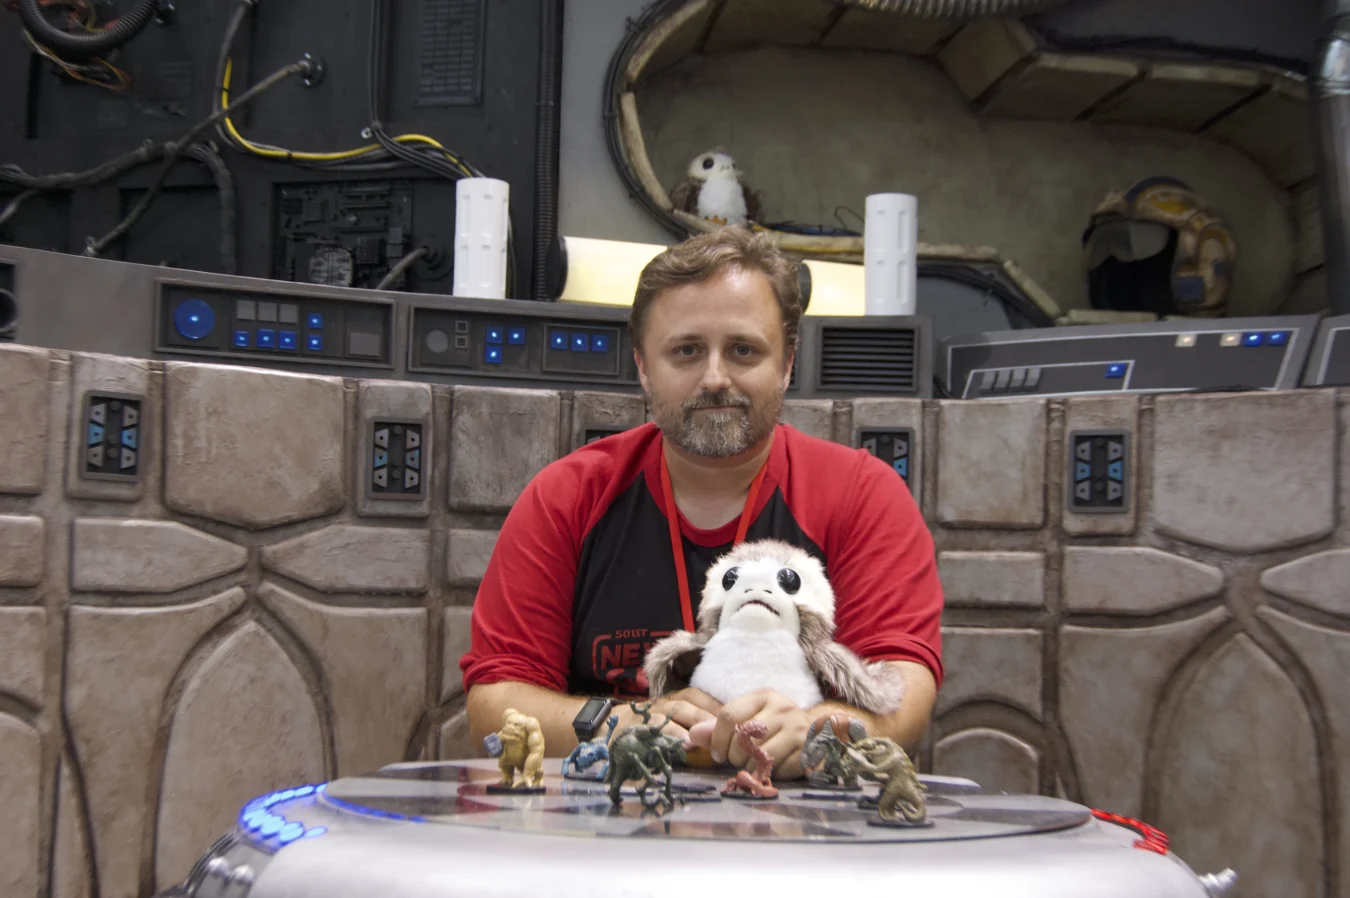 Brian Anderson sits in the Millennium Falcon’s lounge booth at FAN EXPO Boston in 2019. He’s spent decades building costumes of all types, and has focused extensively on 3D printing, making everything from droids to costumes to the game figures sitting on the table before him.